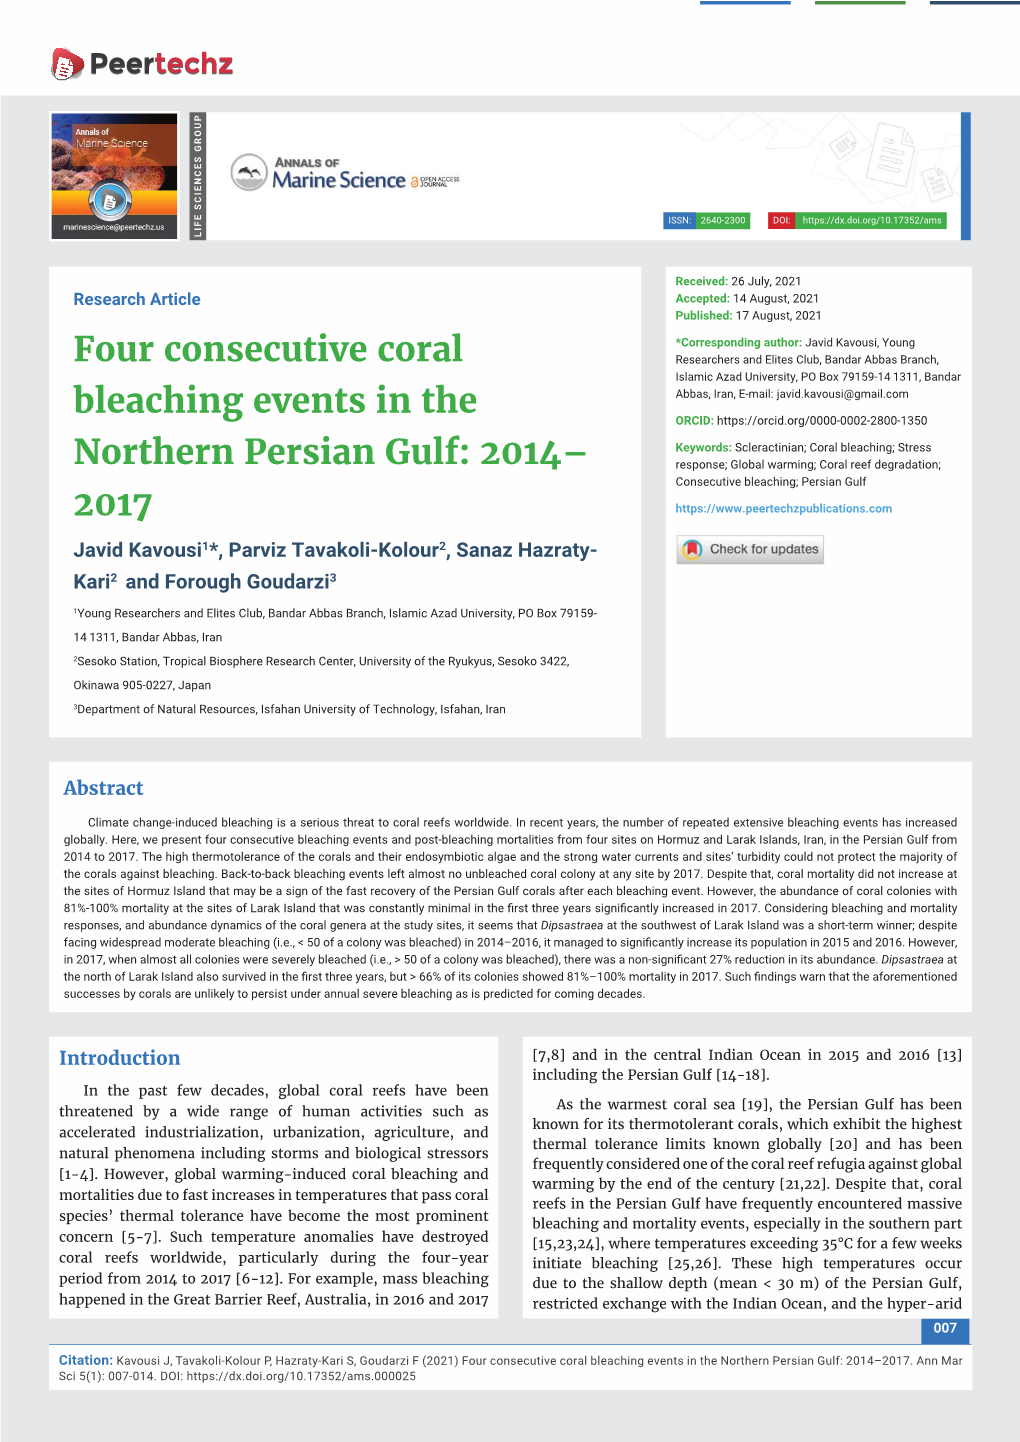 Four Consecutive Coral Bleaching Events in the Northern Persian Gulf: 2014–2017